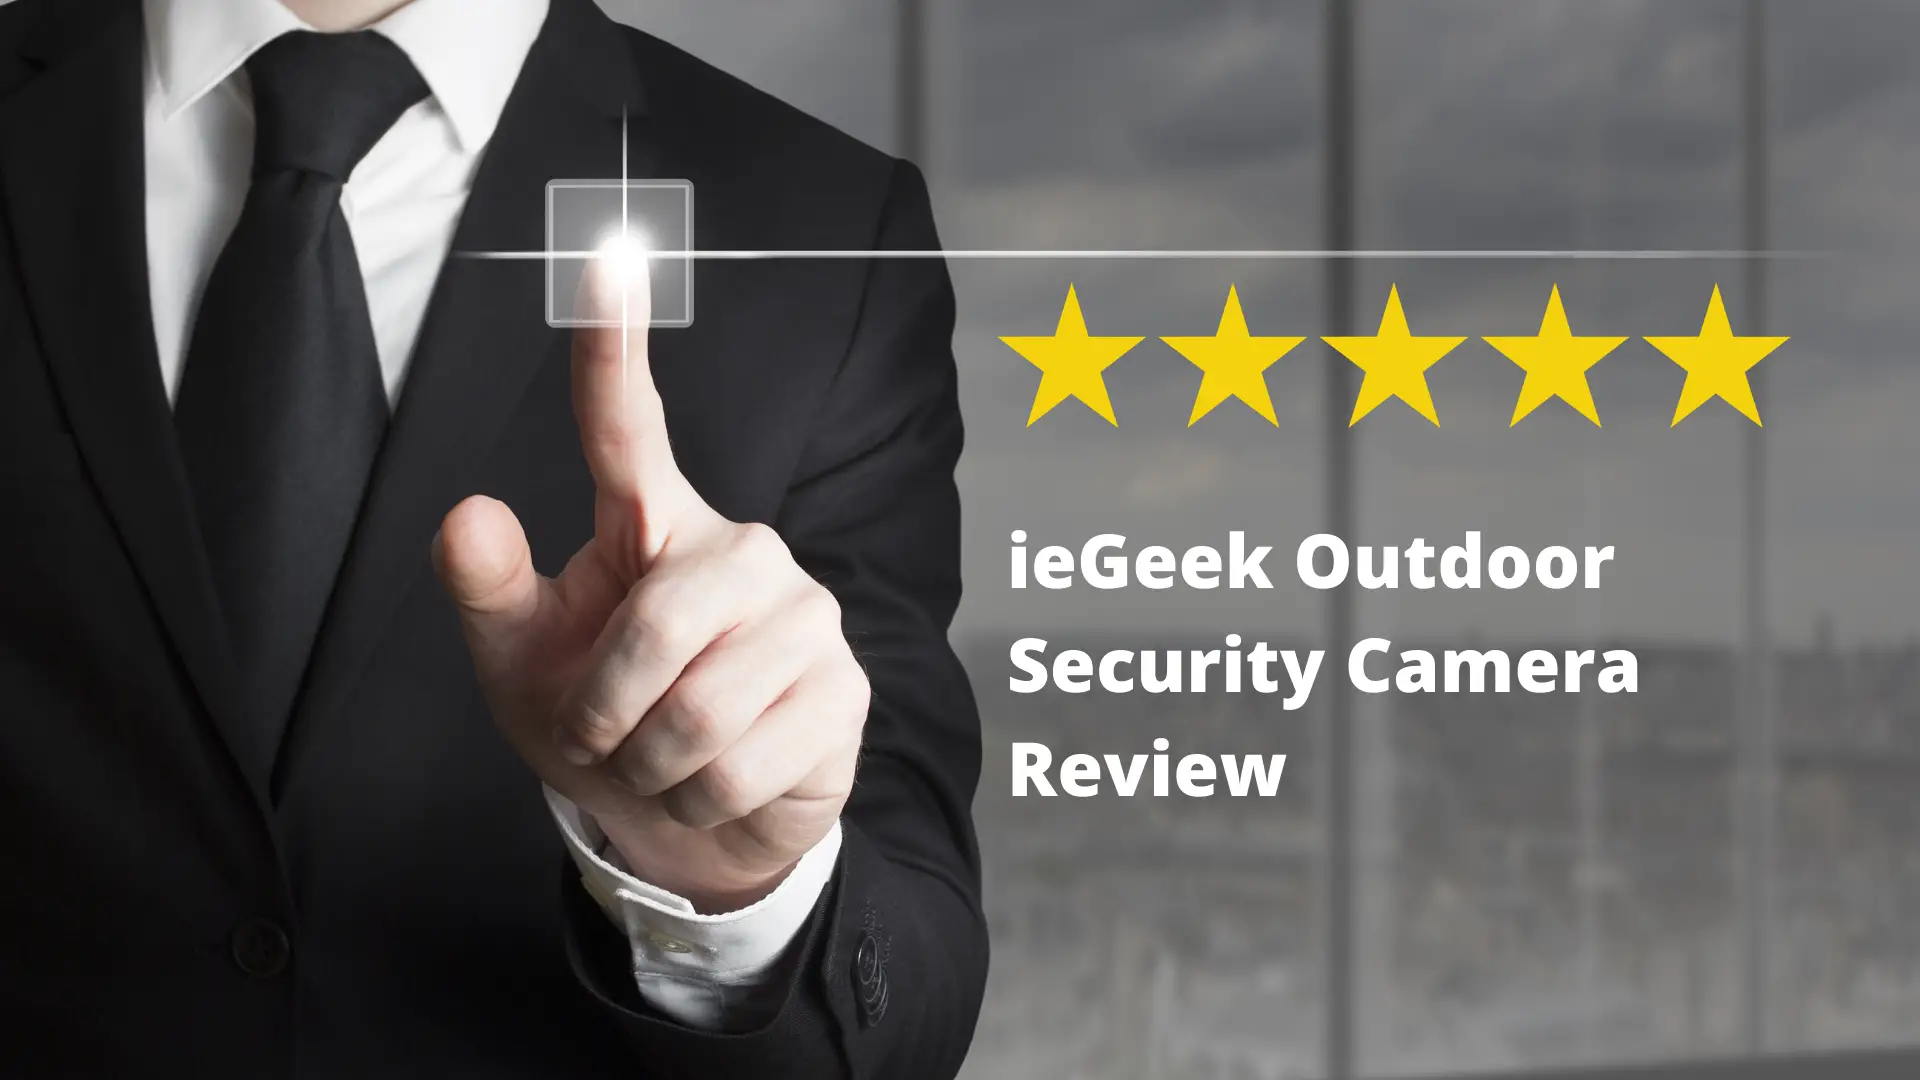 ieGeek Outdoor Security Camera Review